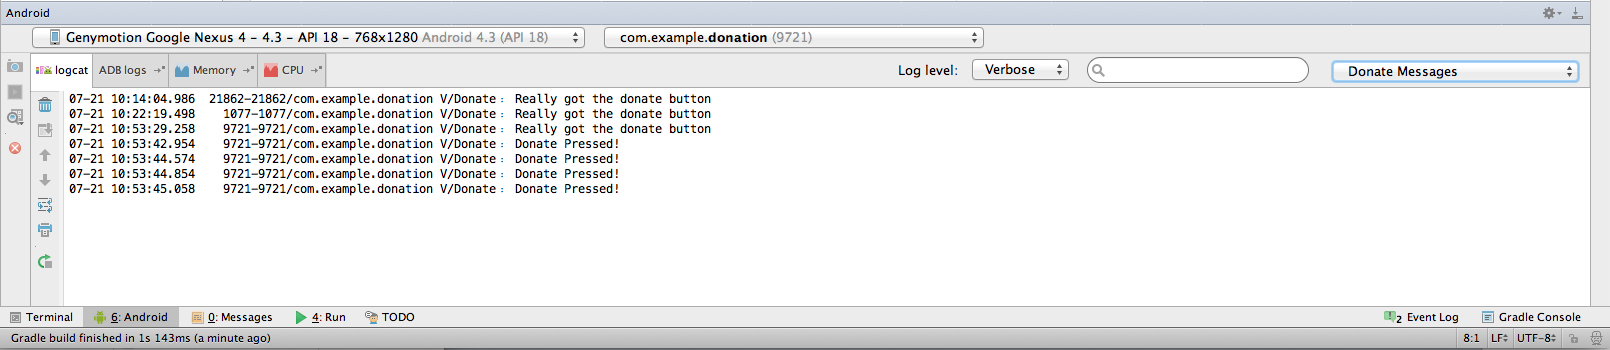 Figure 1: LogCat message generated on Donation button press